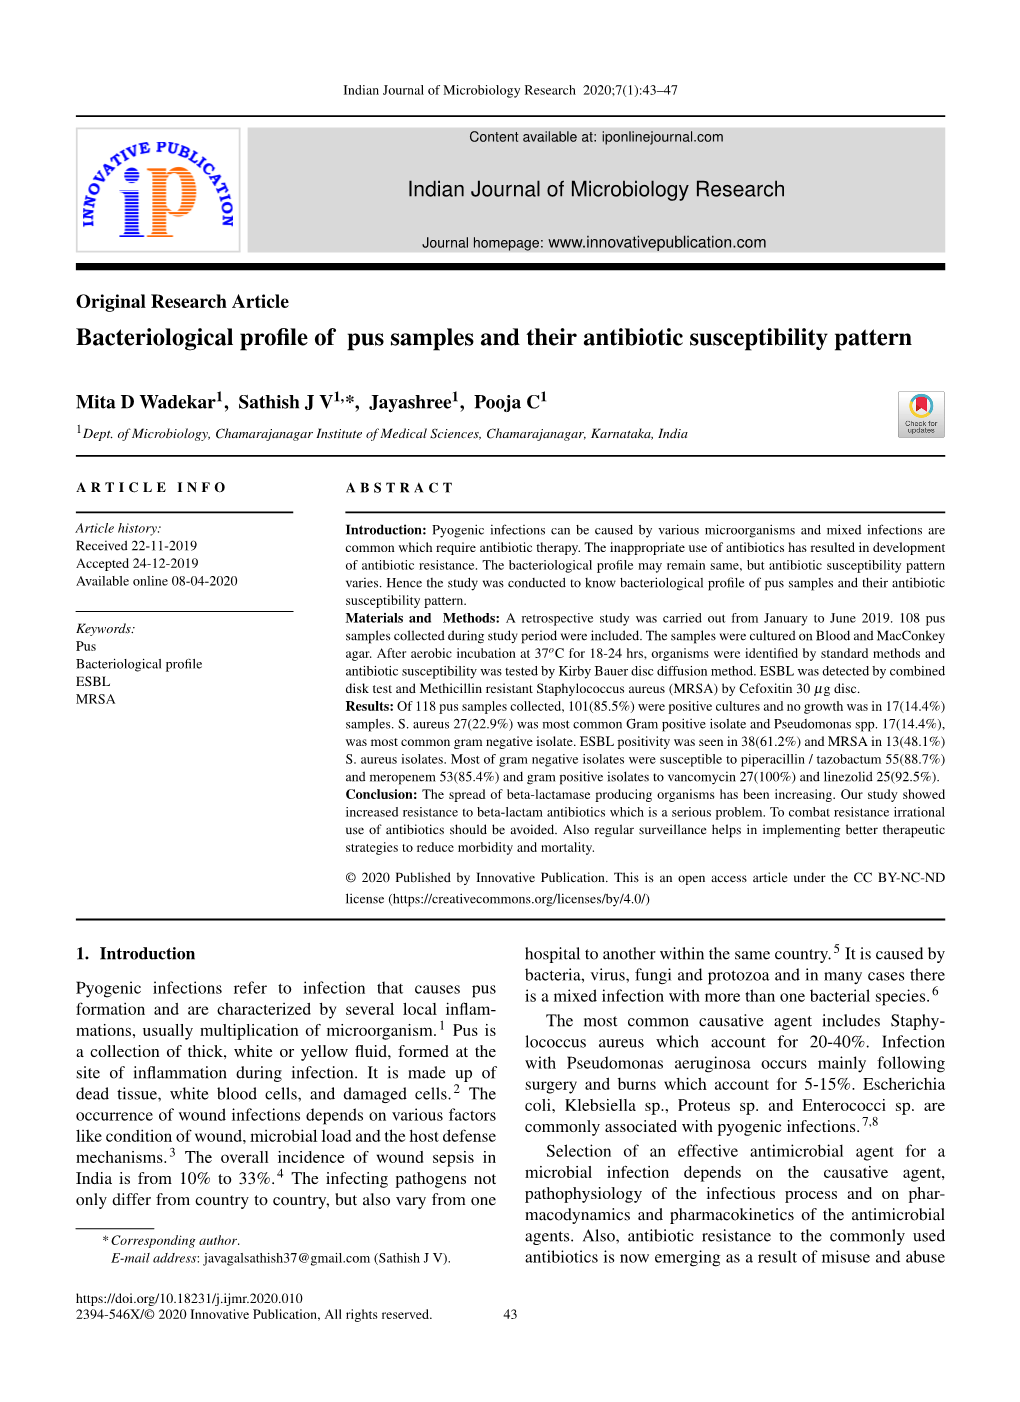 Bacteriological Profile of Pus Samples and Their Antibiotic Susceptibility